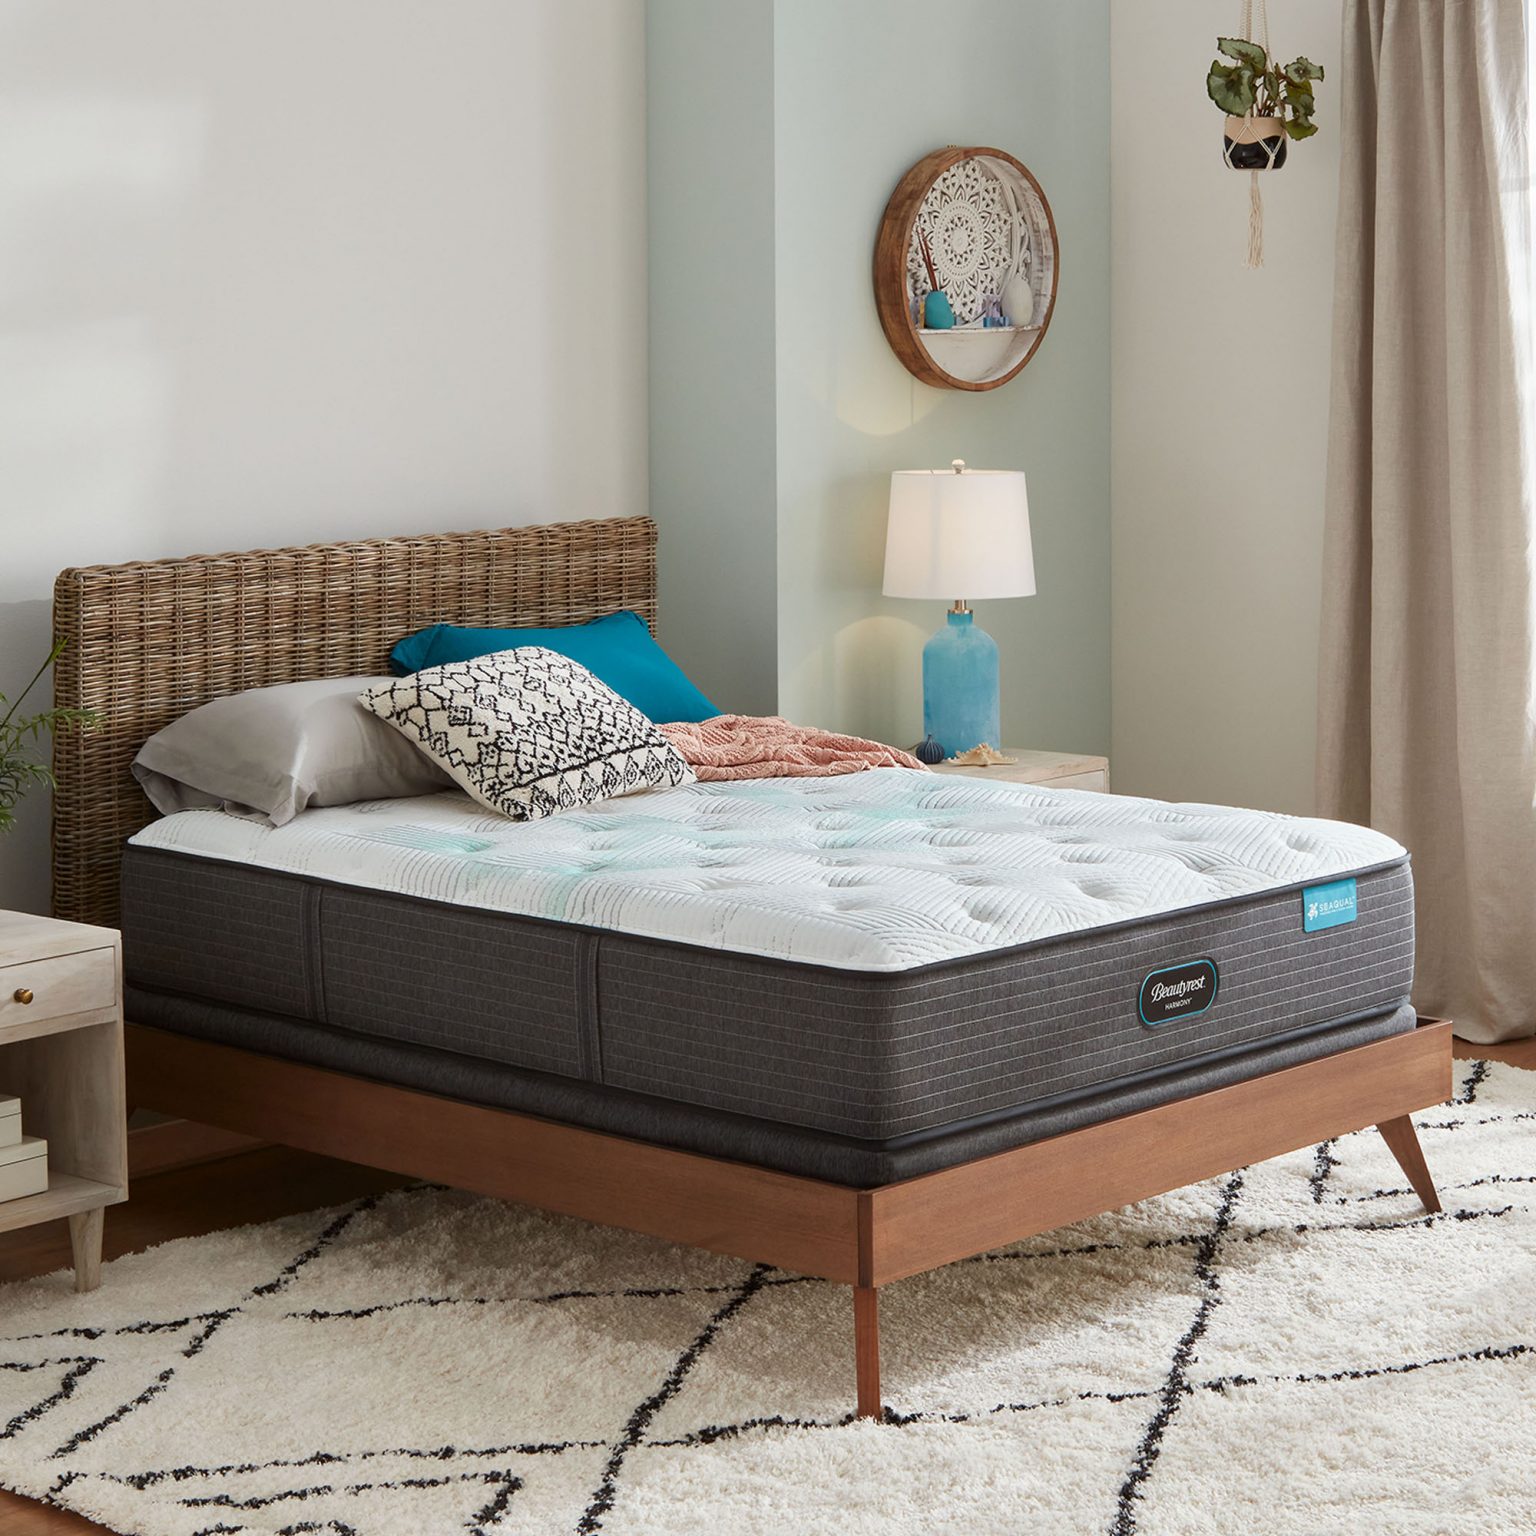 Beautyrest Mattress: Answering Your Frequently Asked Questions - Best ...